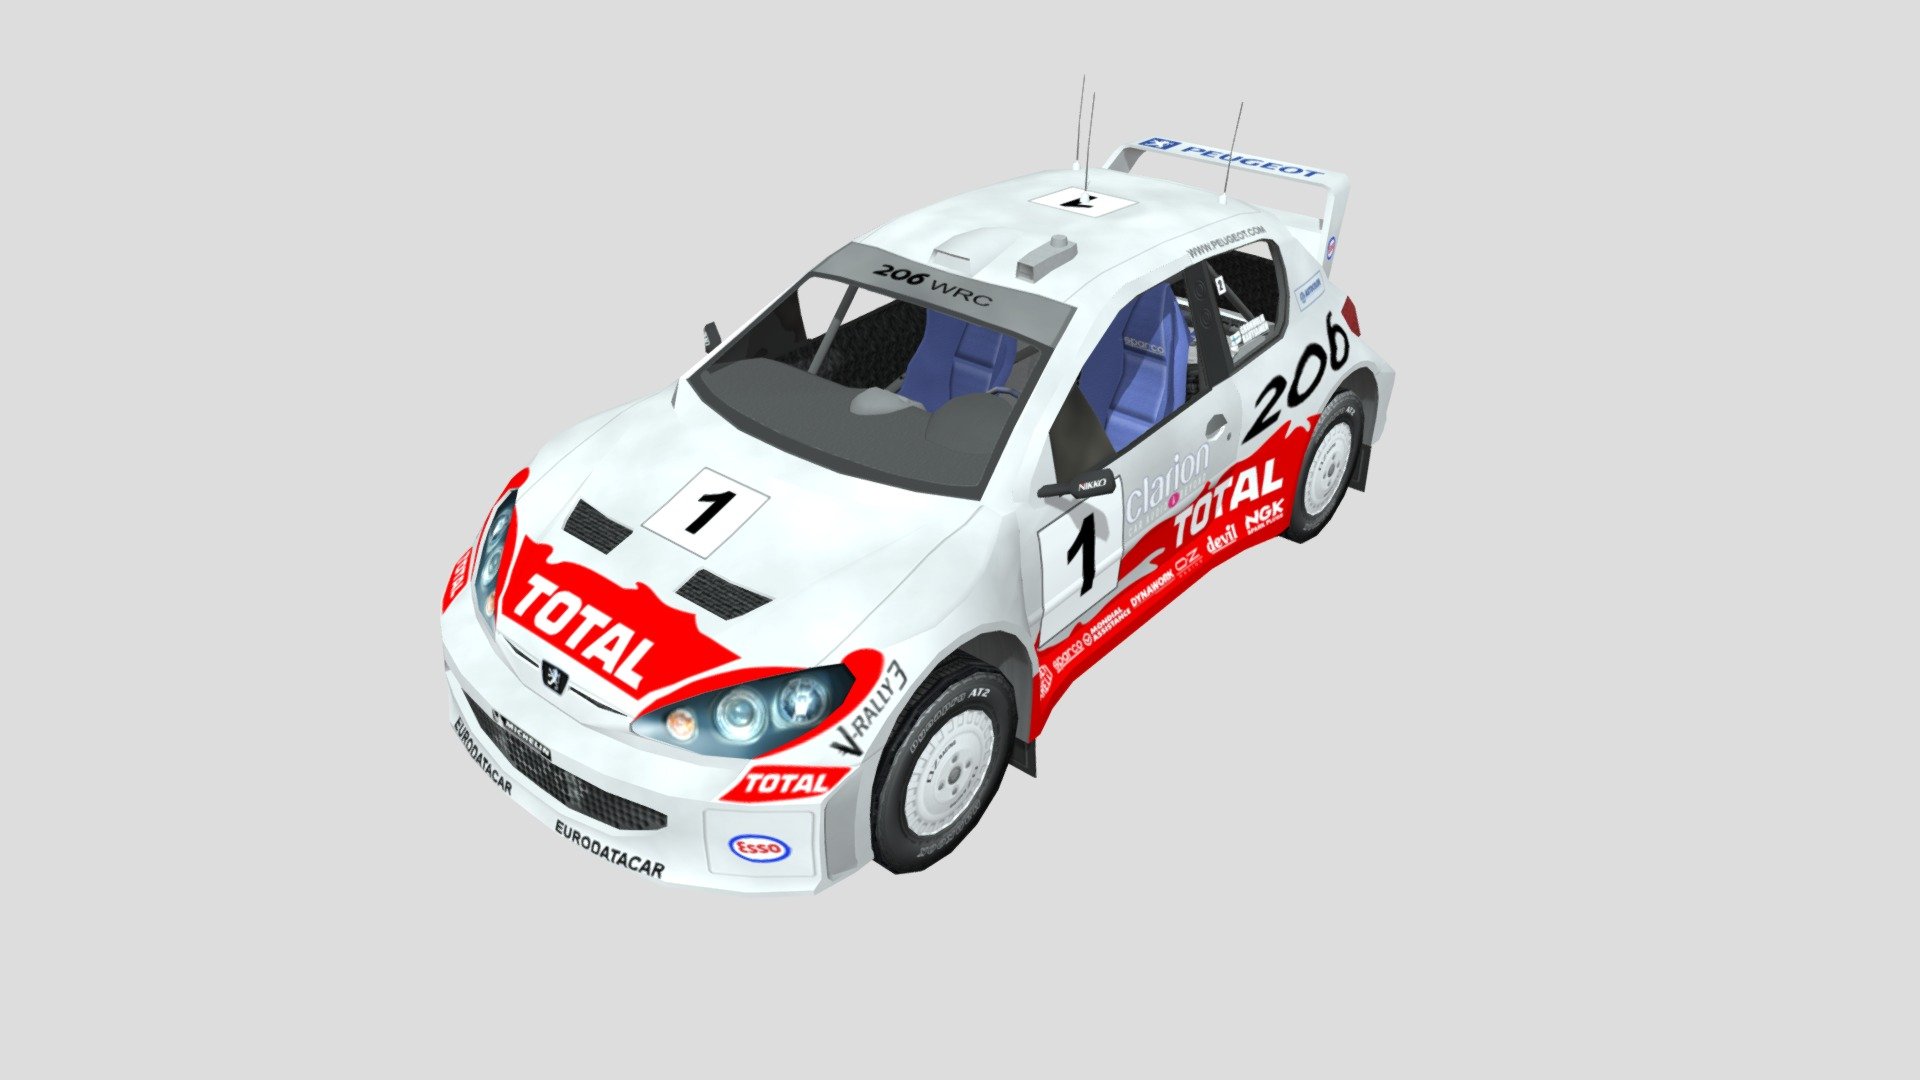 The Peugeot 206 WRC is a World Rally Car based on the Peugeot 206. It was used by Peugeot Sport, Peugeot's factory team, in the World Rally Championship from 1999 to 2003. The car brought Peugeot the manufacturers' world title three years in a row from 2000 to 2002. Marcus Grönholm won the drivers' title in 2000 and 2002 3d model